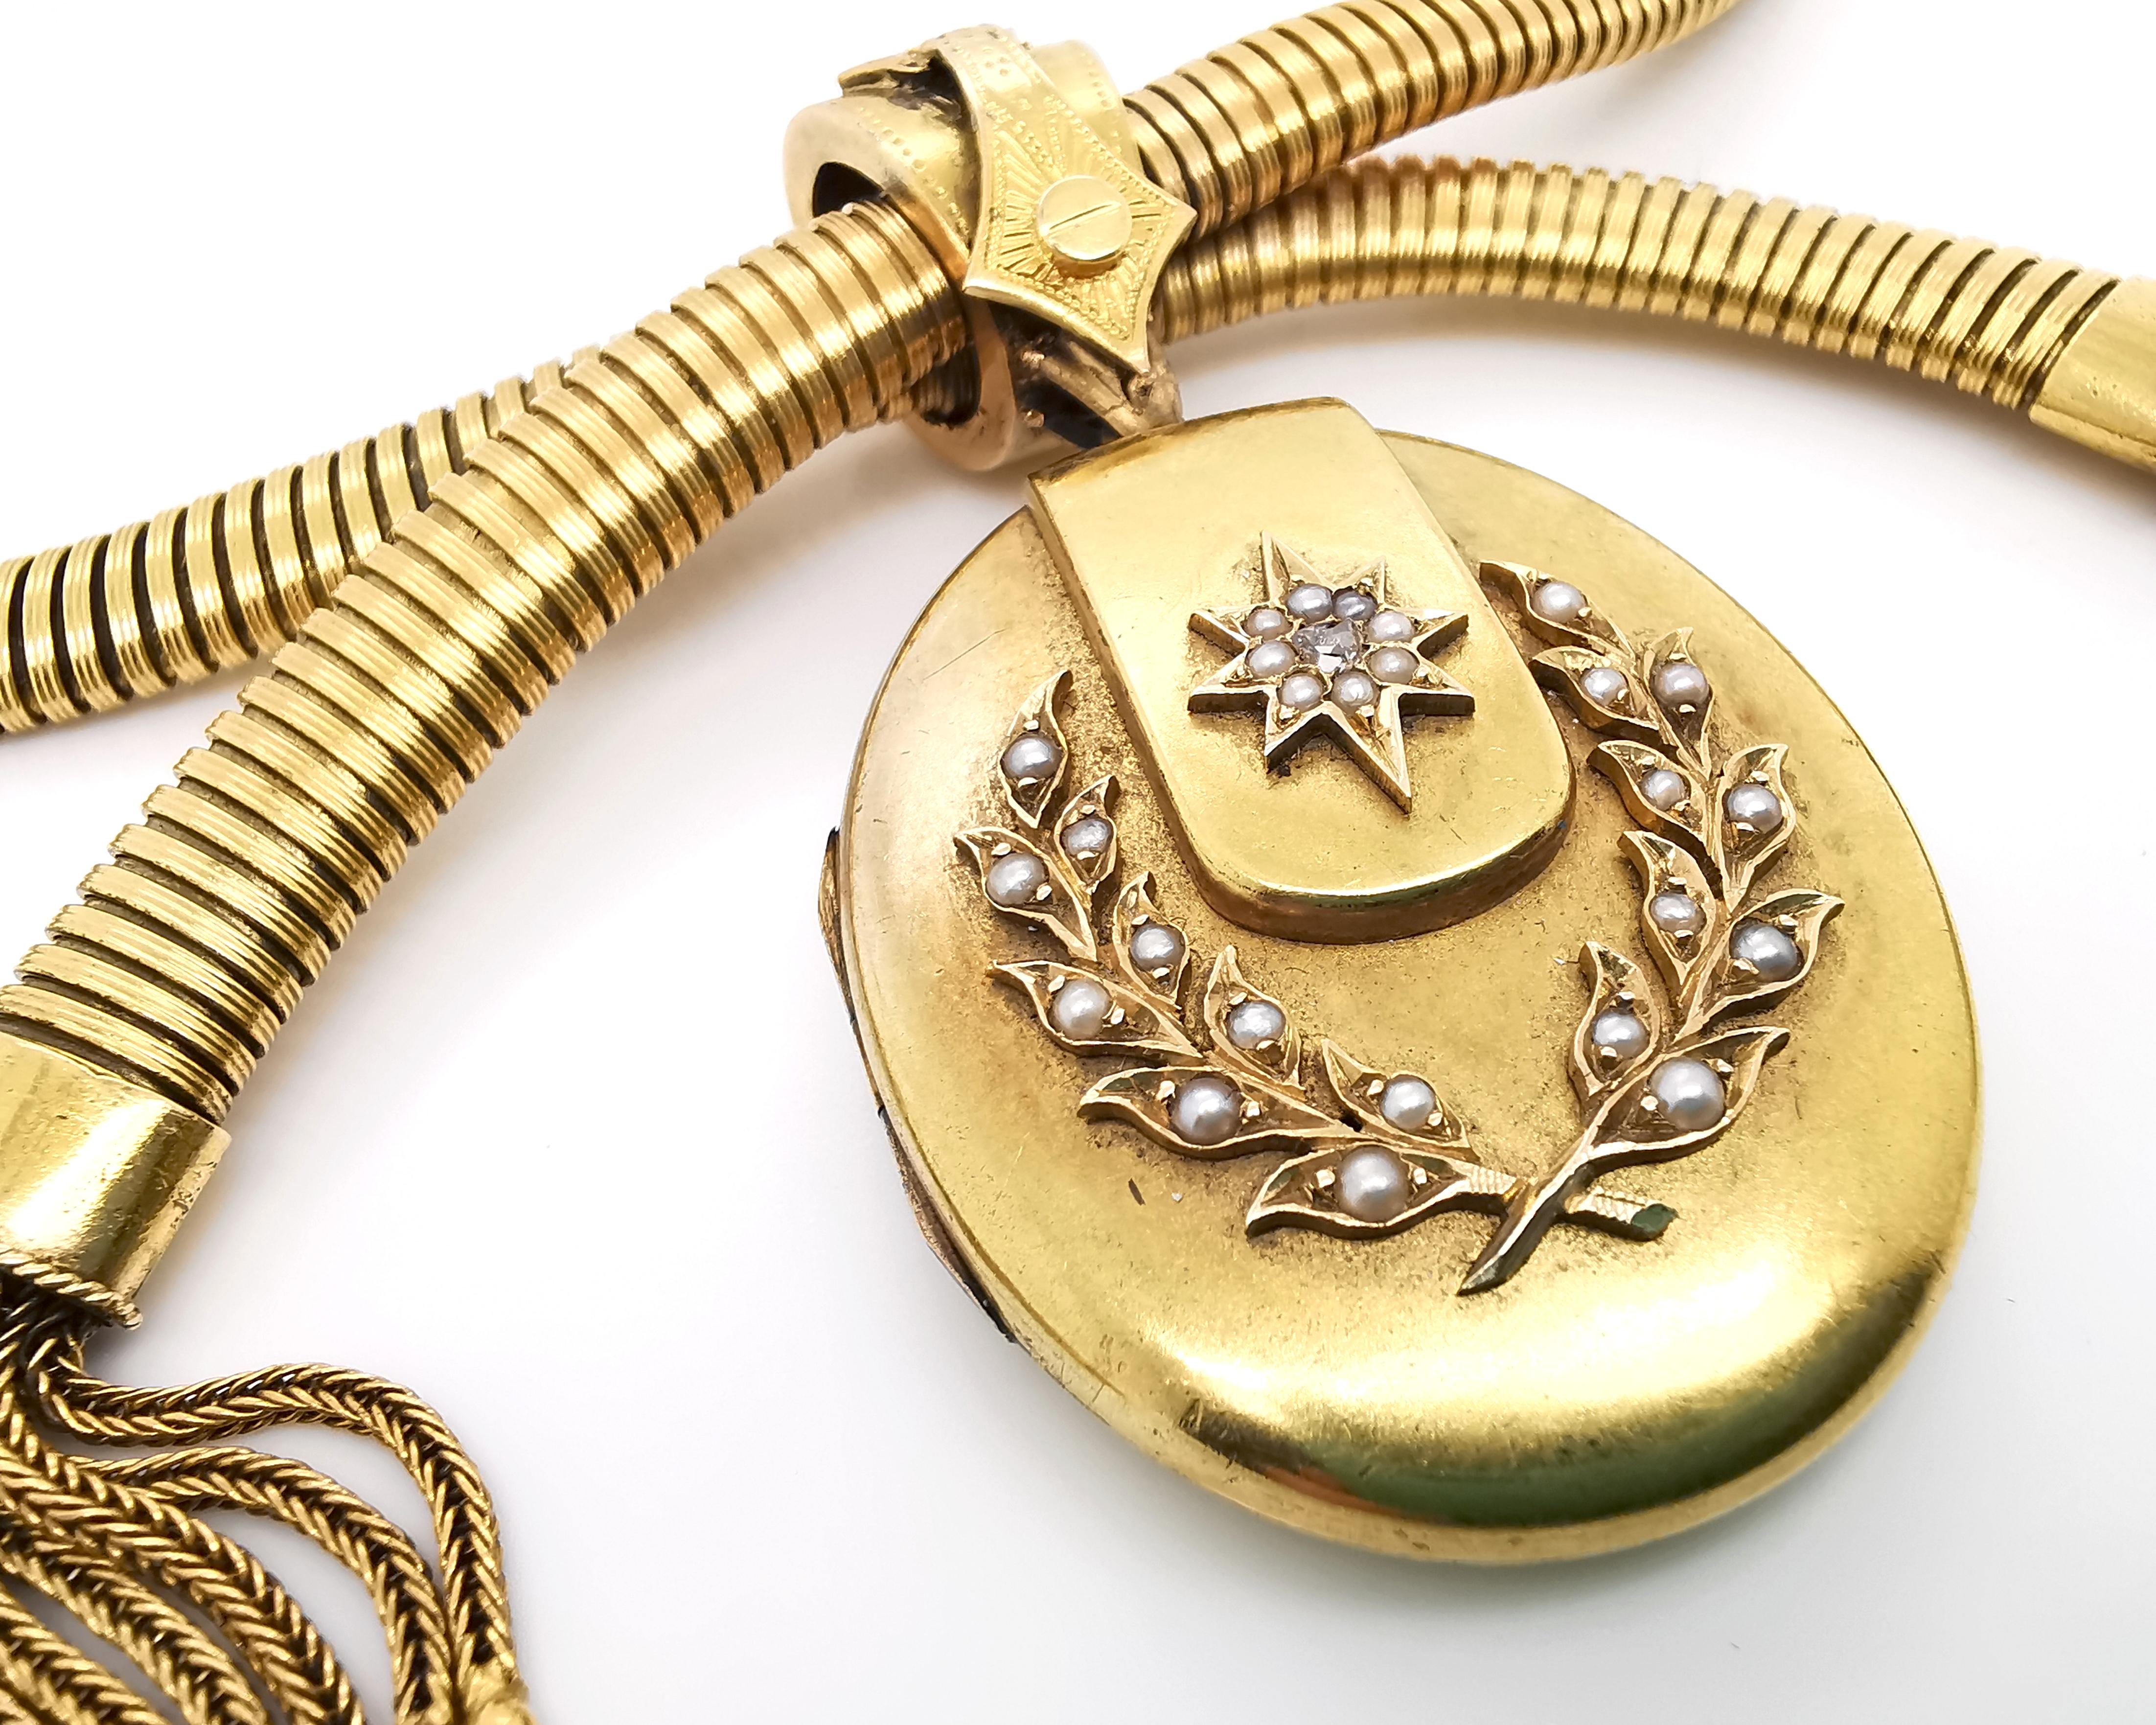 A Victorian gold gaspipe necklace with a locket and tassels, with a flexible gaspipe style collar, terminating in two tassels at the front with an oval hinged locket suspending from the centre decorated with an applied star and laurel wreath motif